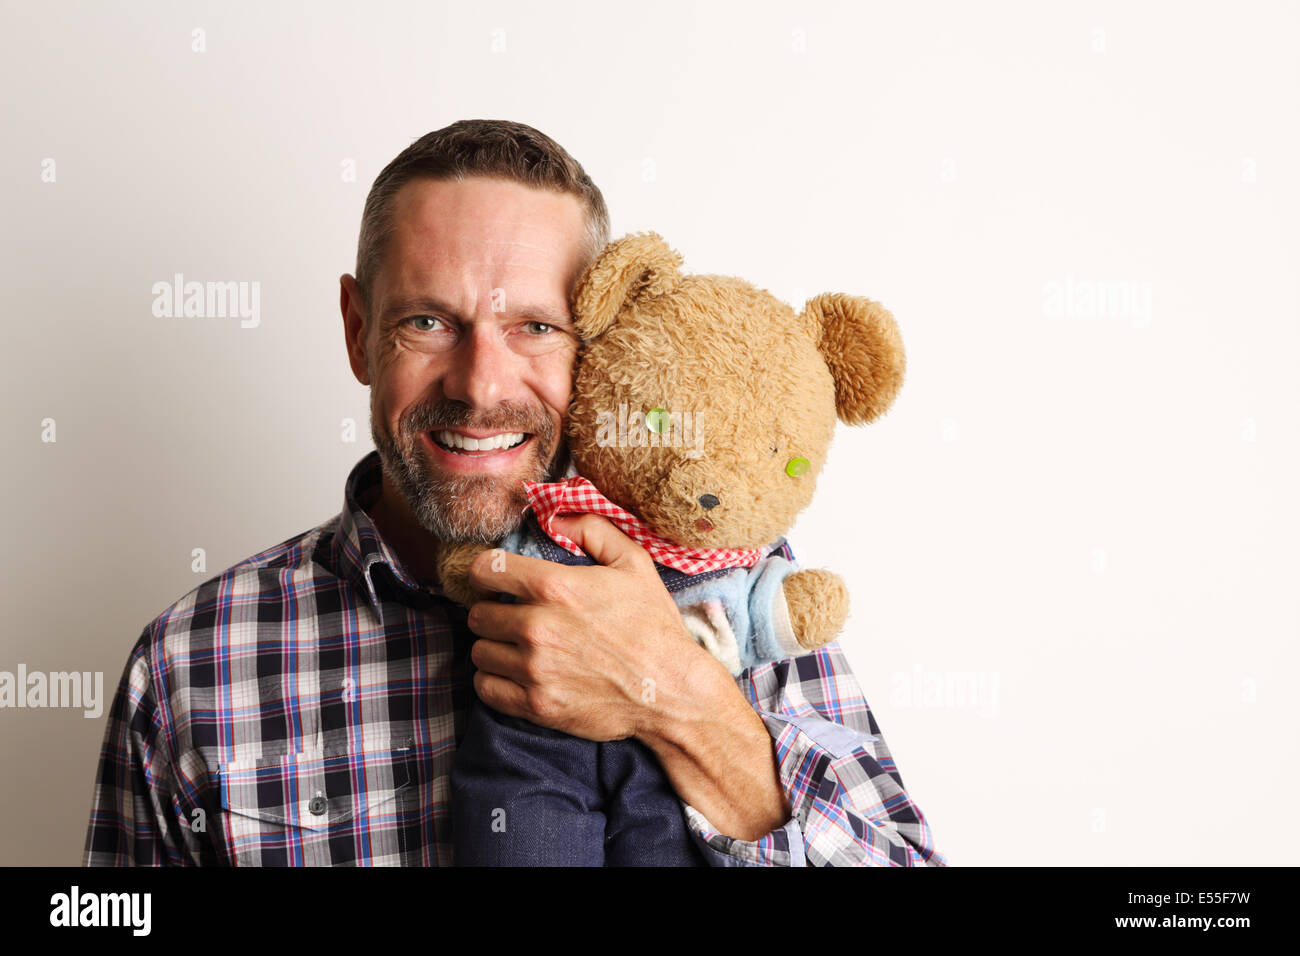 Man smiling and holding a teddy bear Banque D'Images